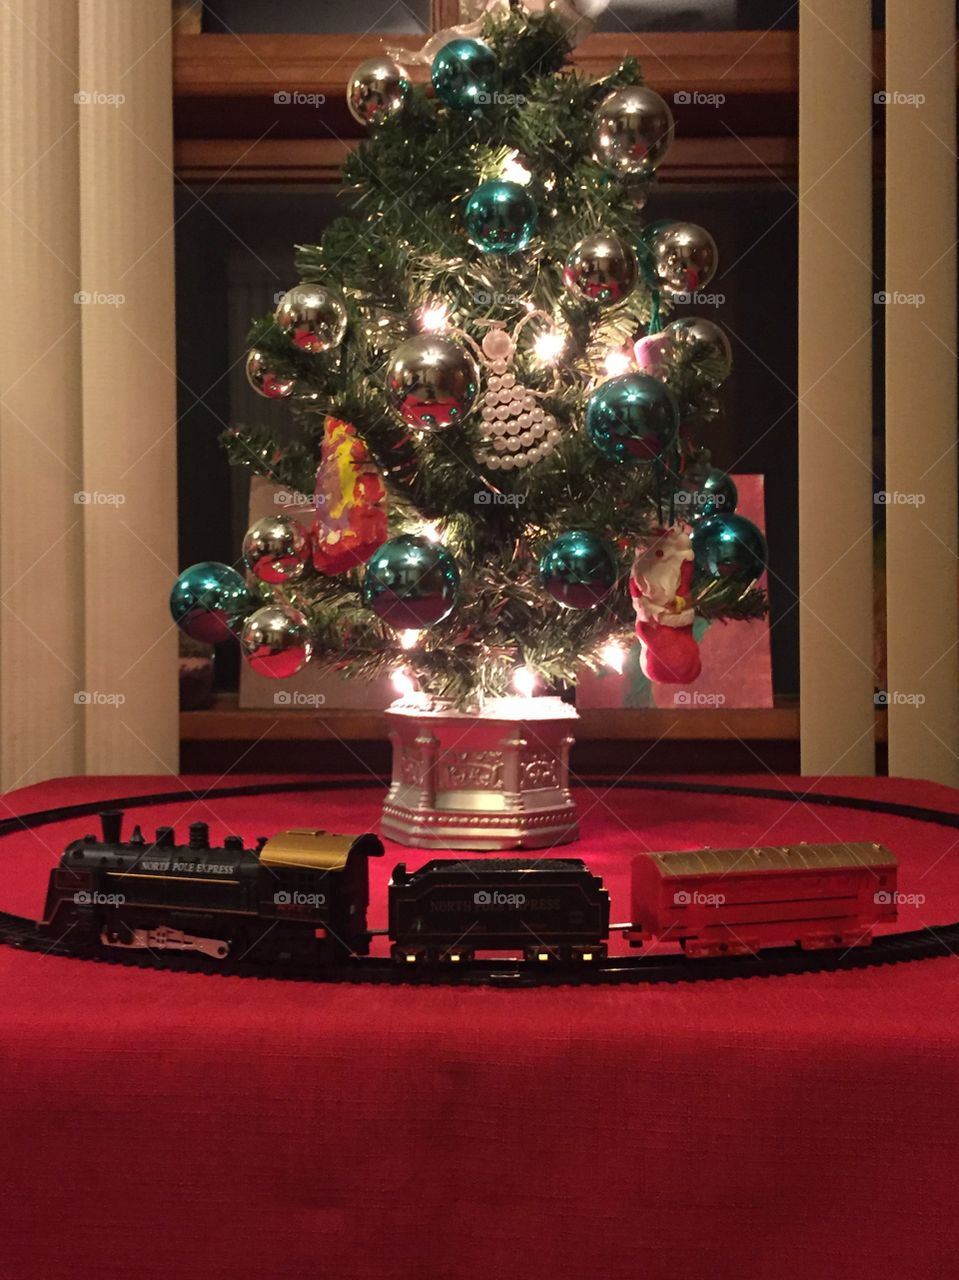 My love of trains an my first Christmas present this year 